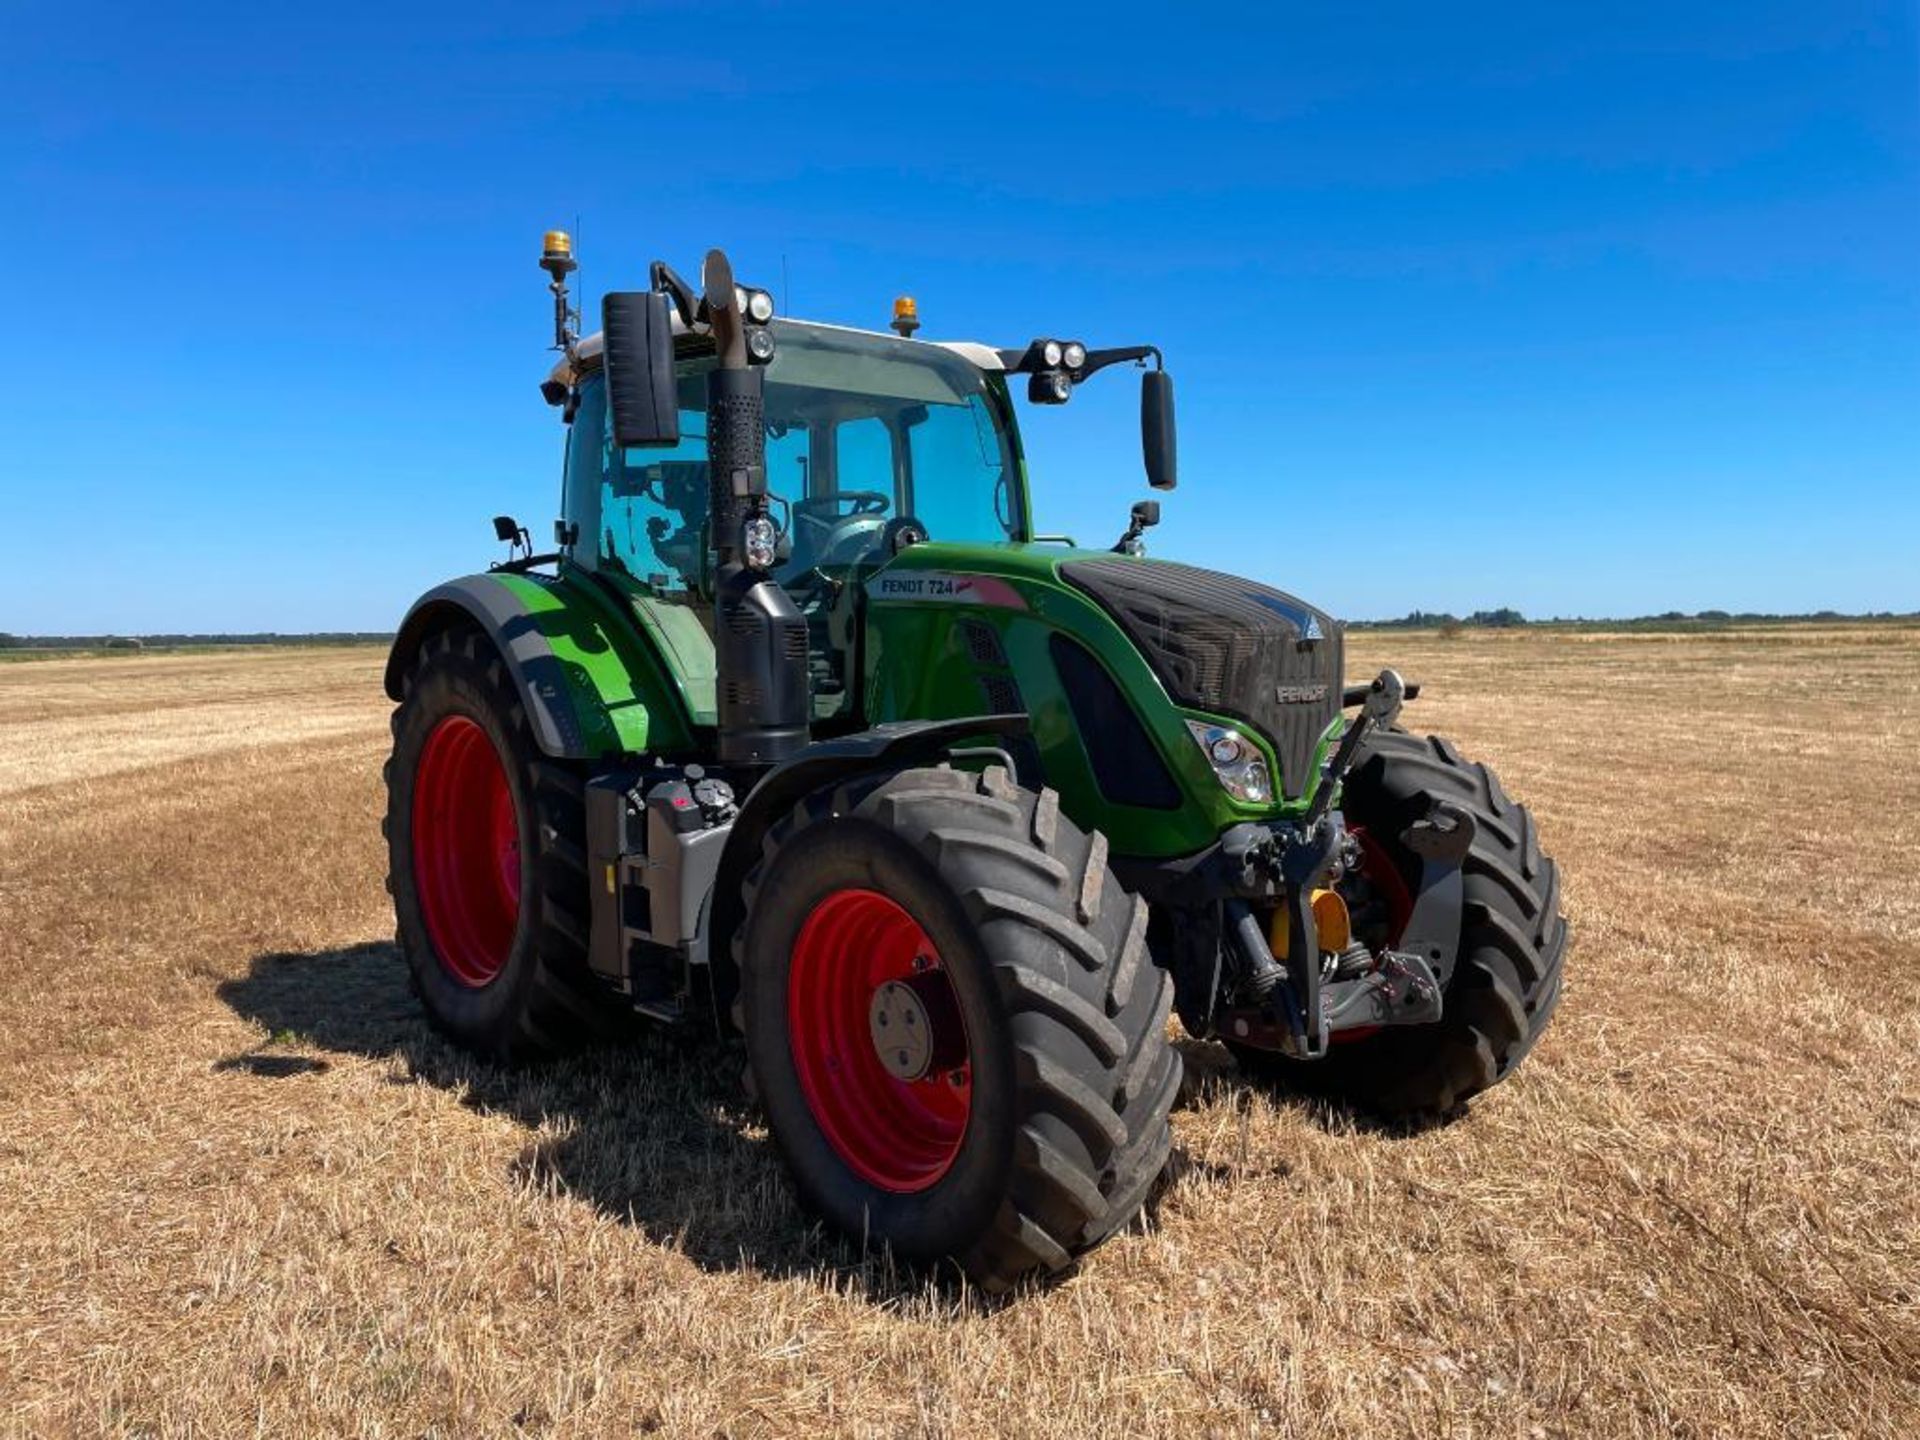 2017 Fendt 724 Profi Plus 4wd 50kph tractor with front linkage and PTO, 4 electric spools, air brake - Image 4 of 20